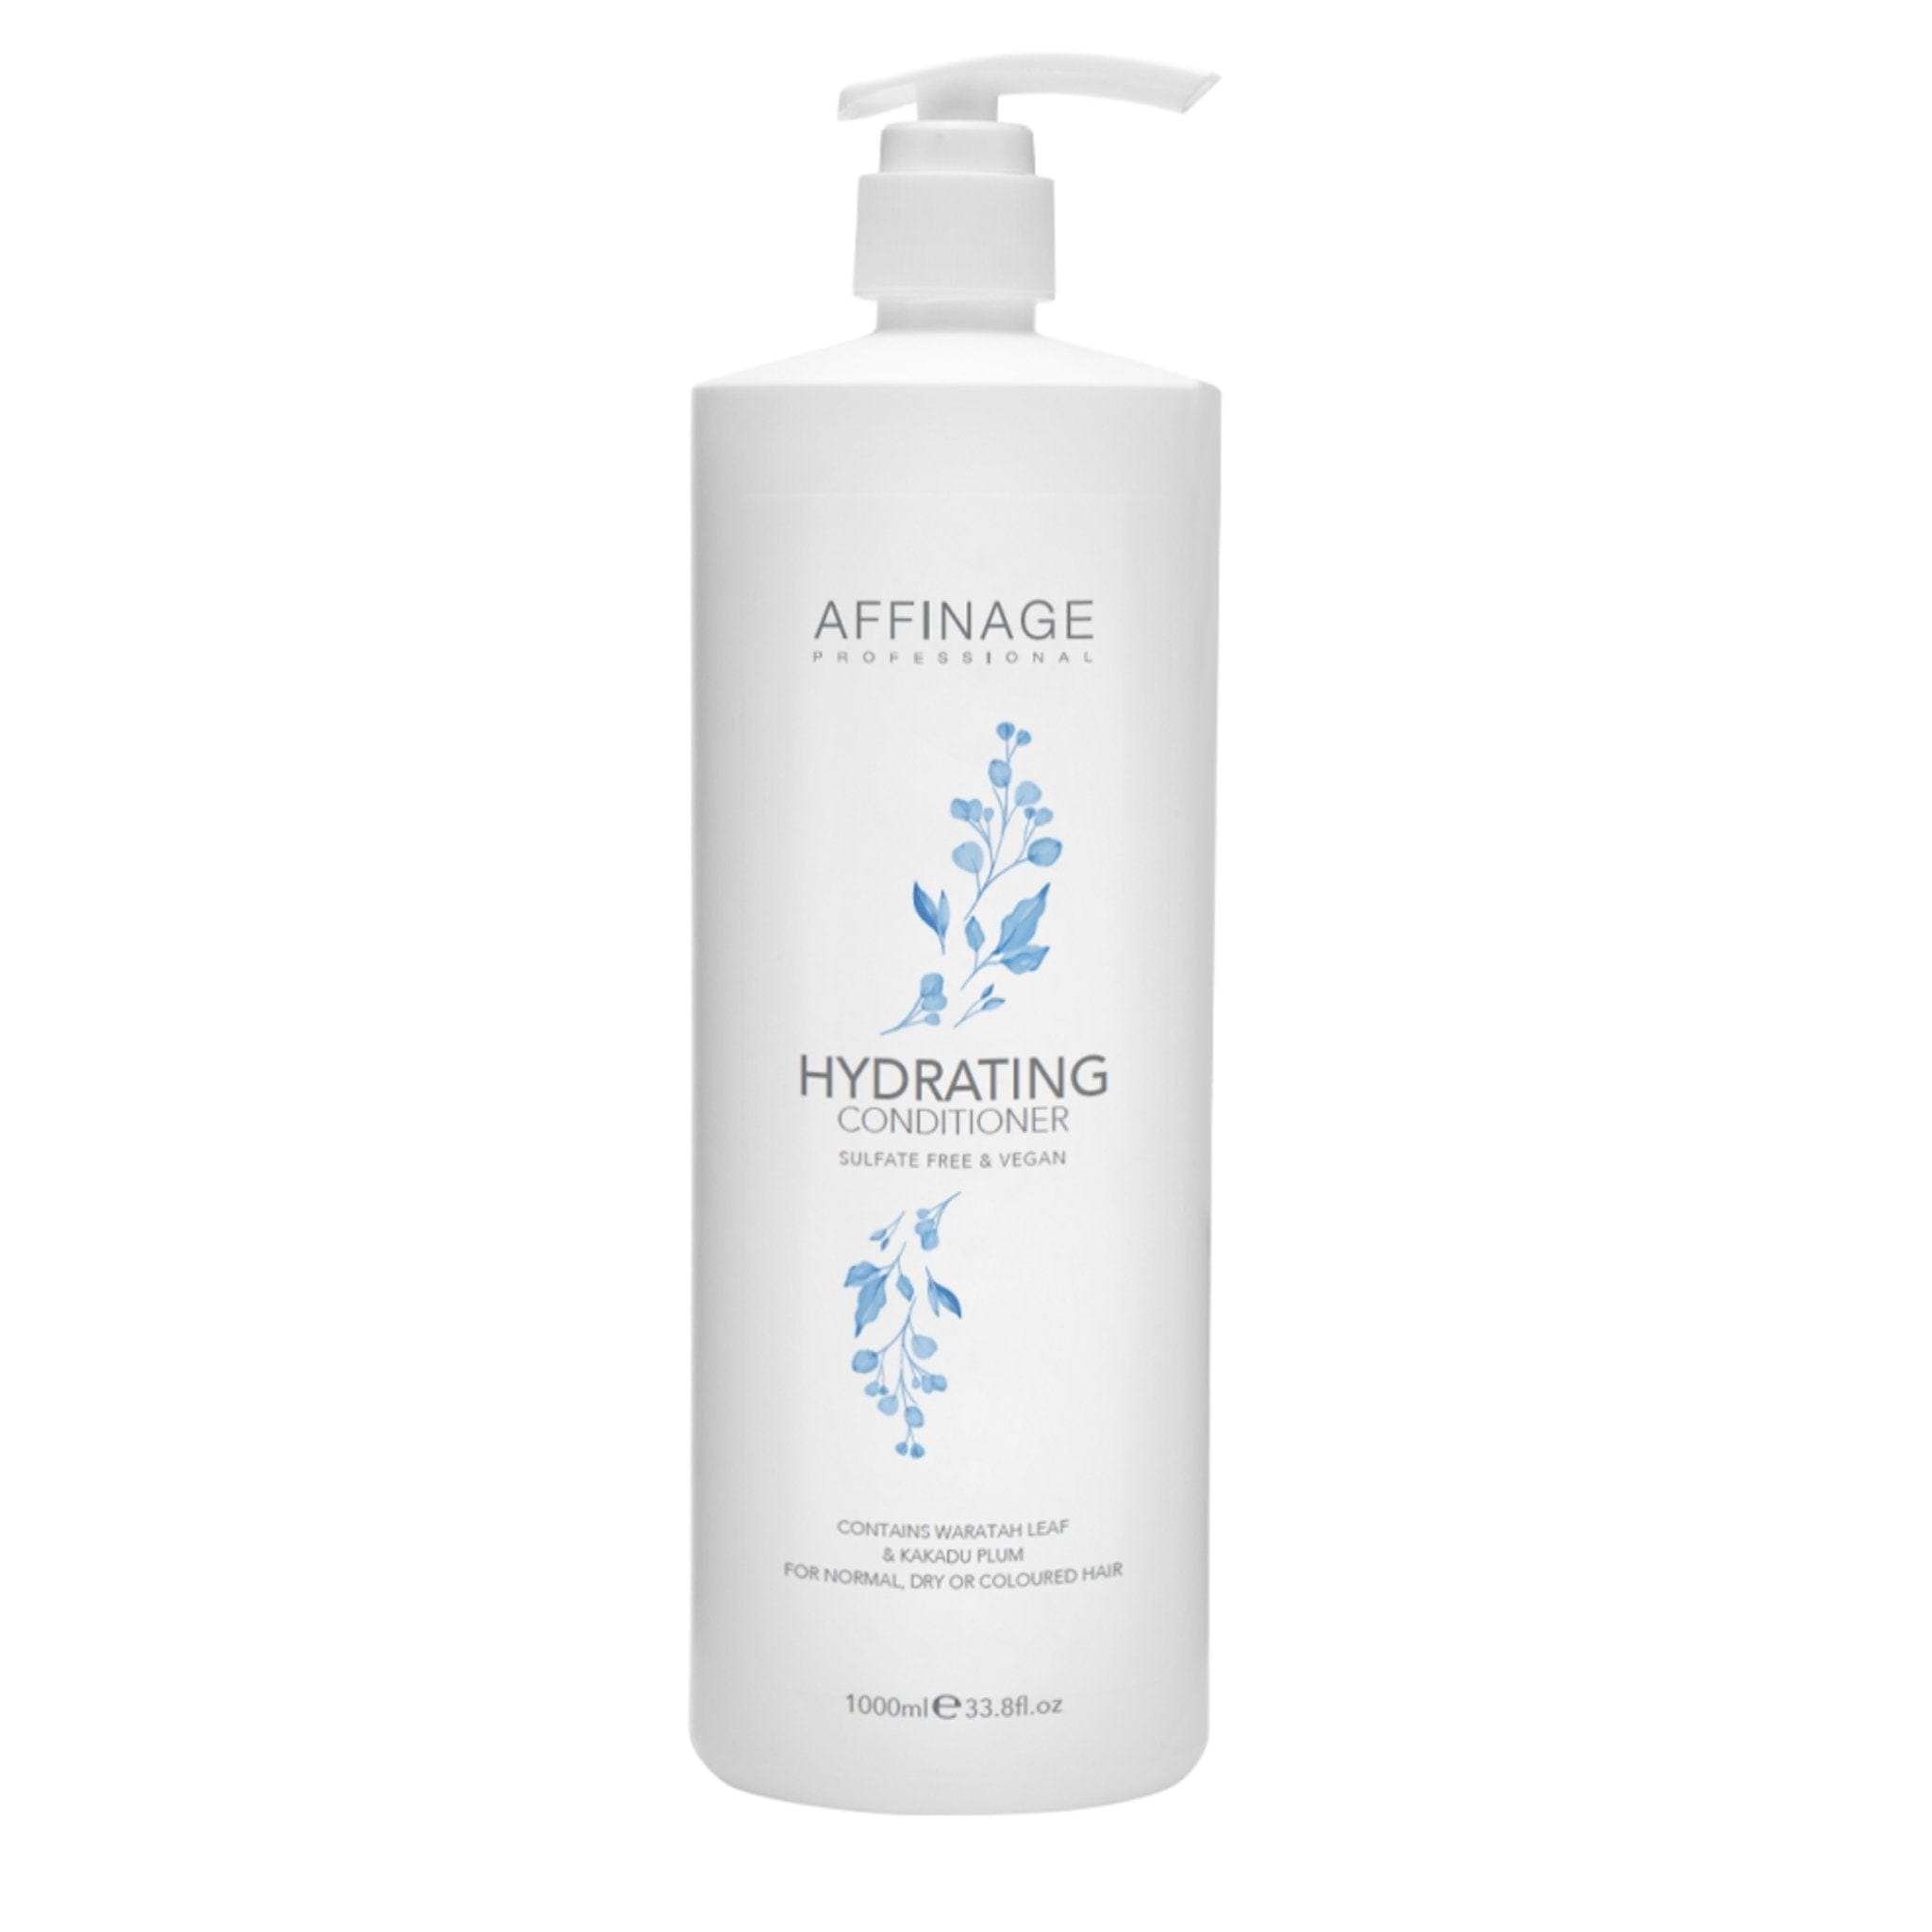 Affinage Cleanse & Care Hydrating Conditioner - HairBeautyInk